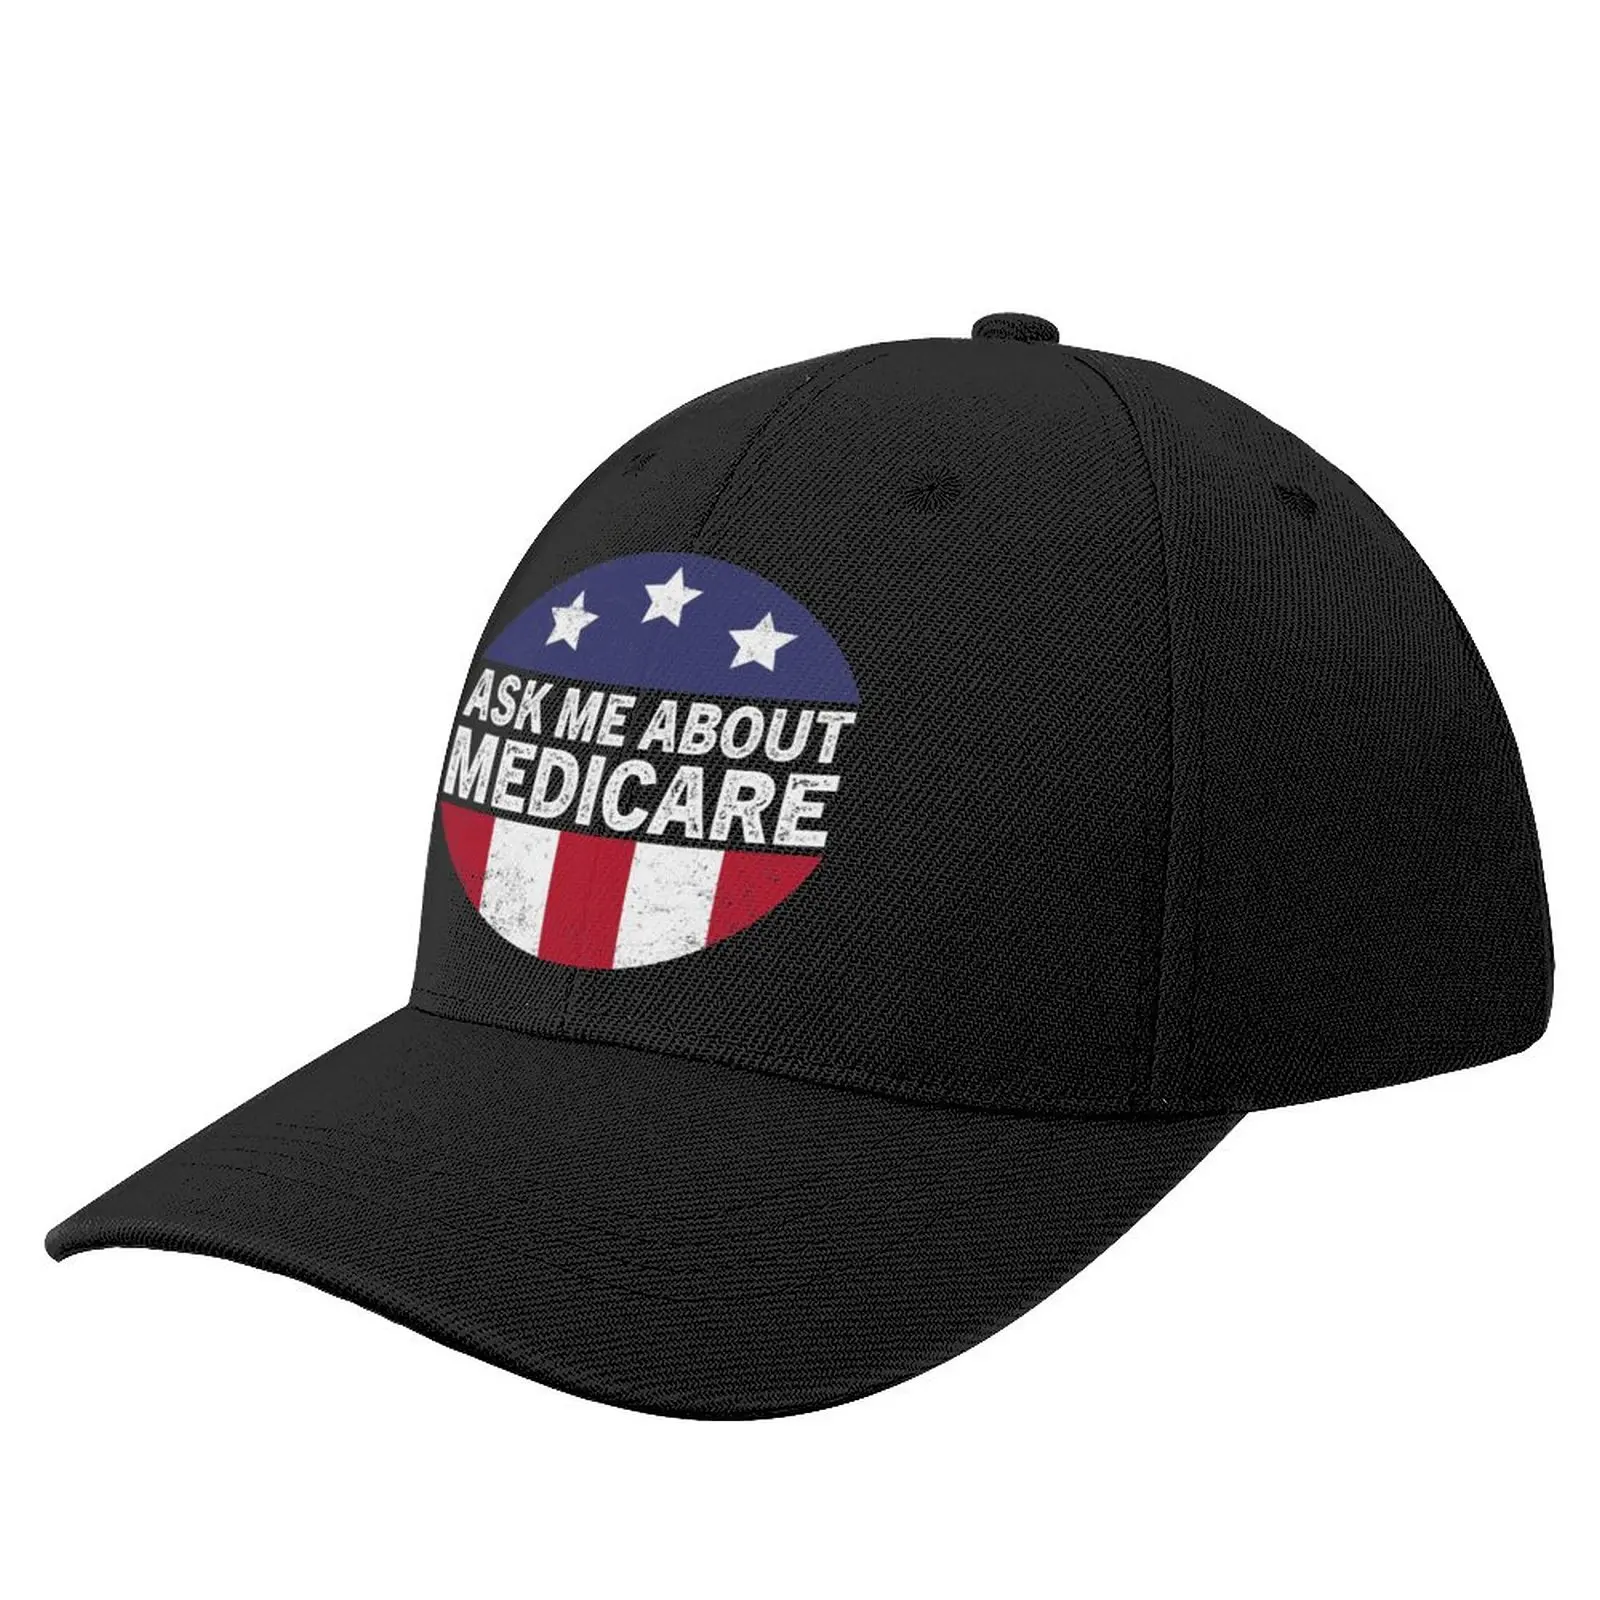 

ask me about medicare Baseball Cap Beach Outing Male derby hat Golf Wear Boy Child Hat Women'S